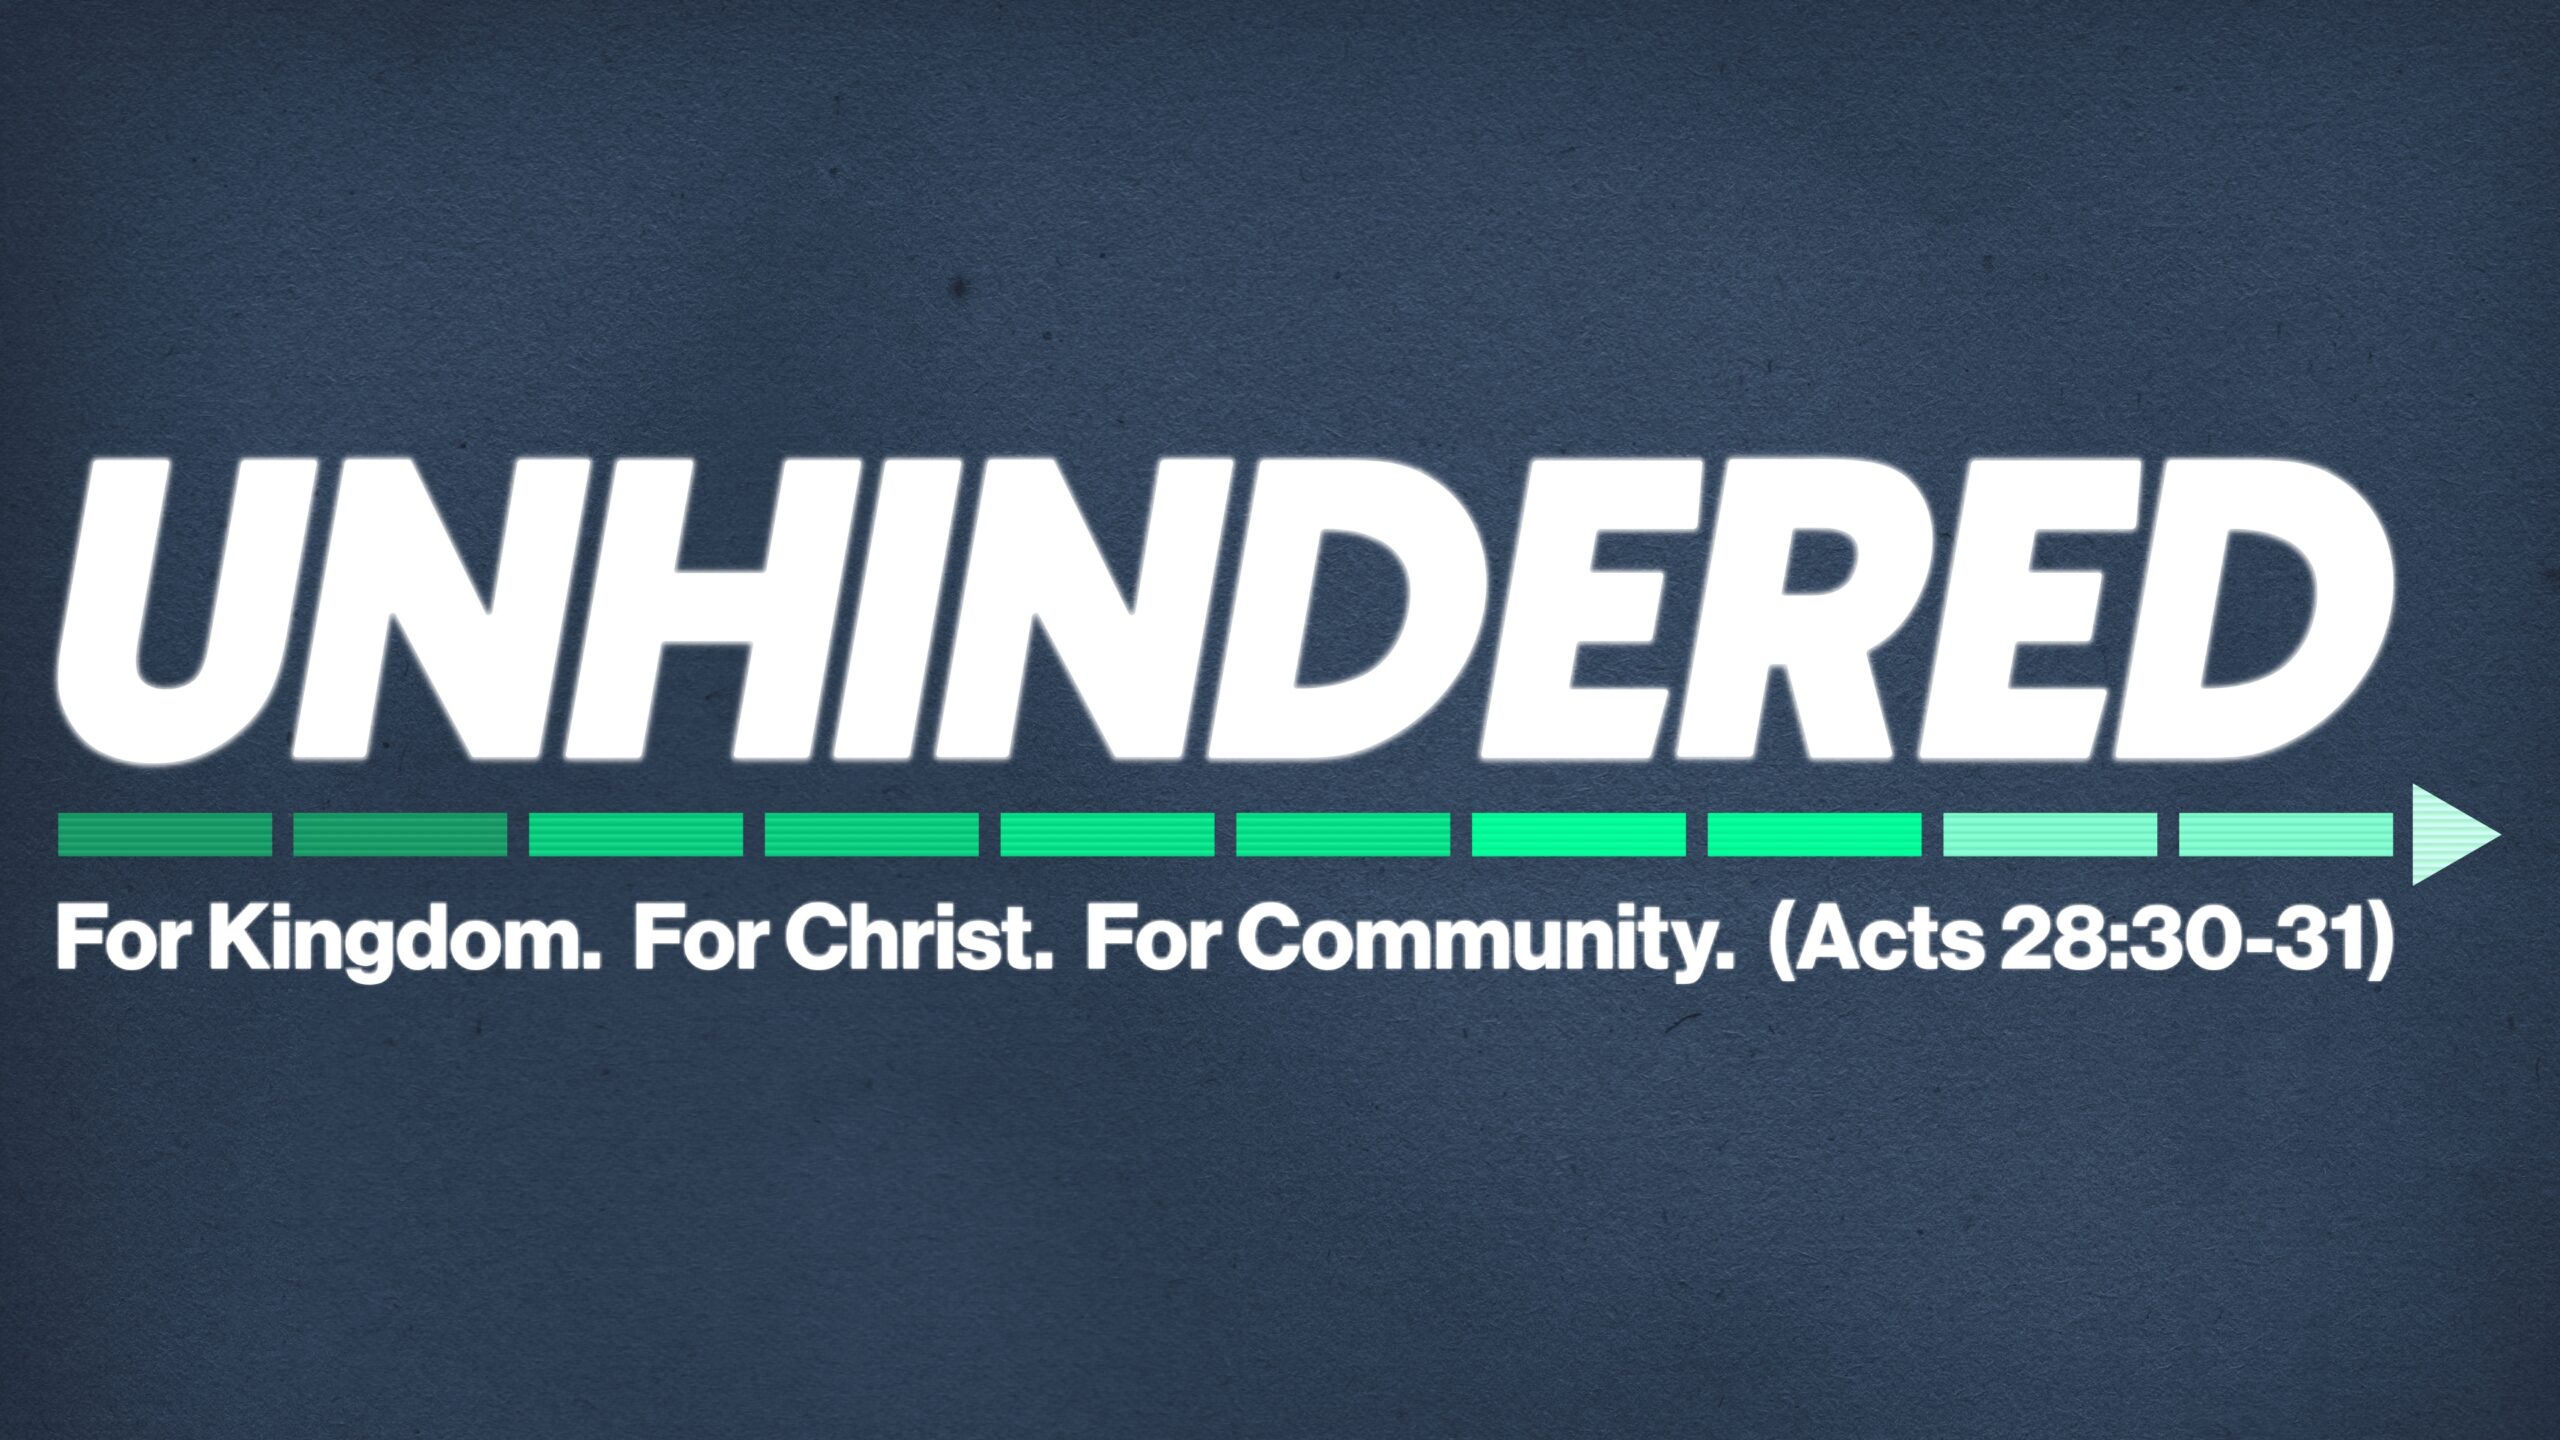 The Characteristics of an Unhindered Church